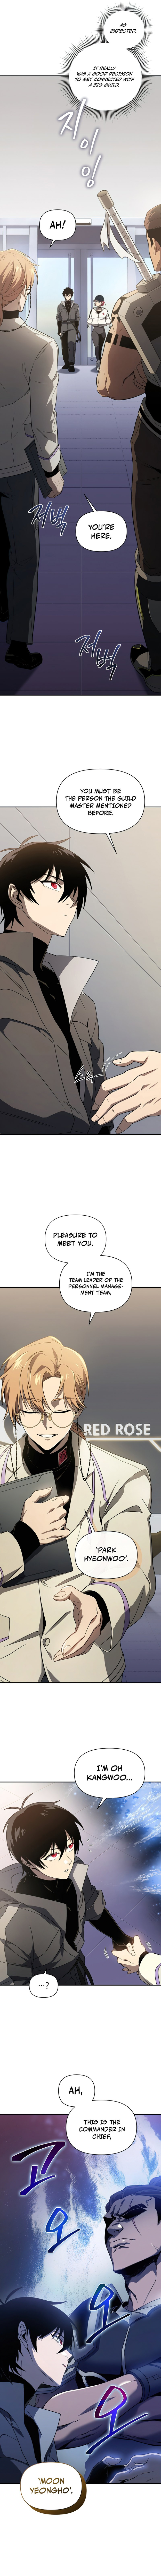 Player Who Returned 10,000 Years Later - Chapter 31 Page 7